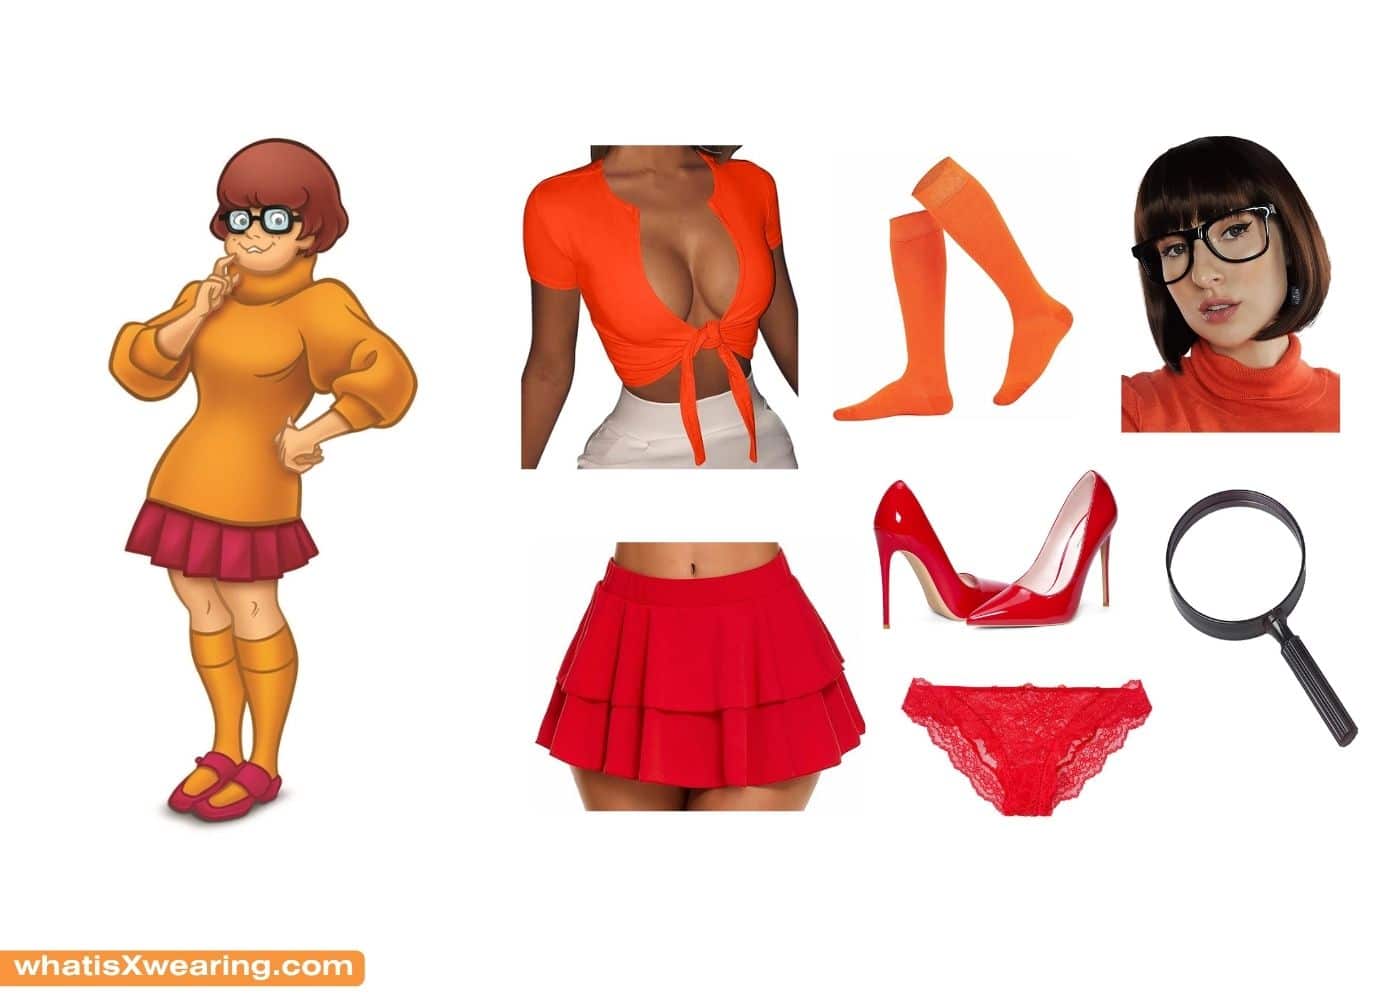 becca chan recommends Hot Velma From Scooby Doo